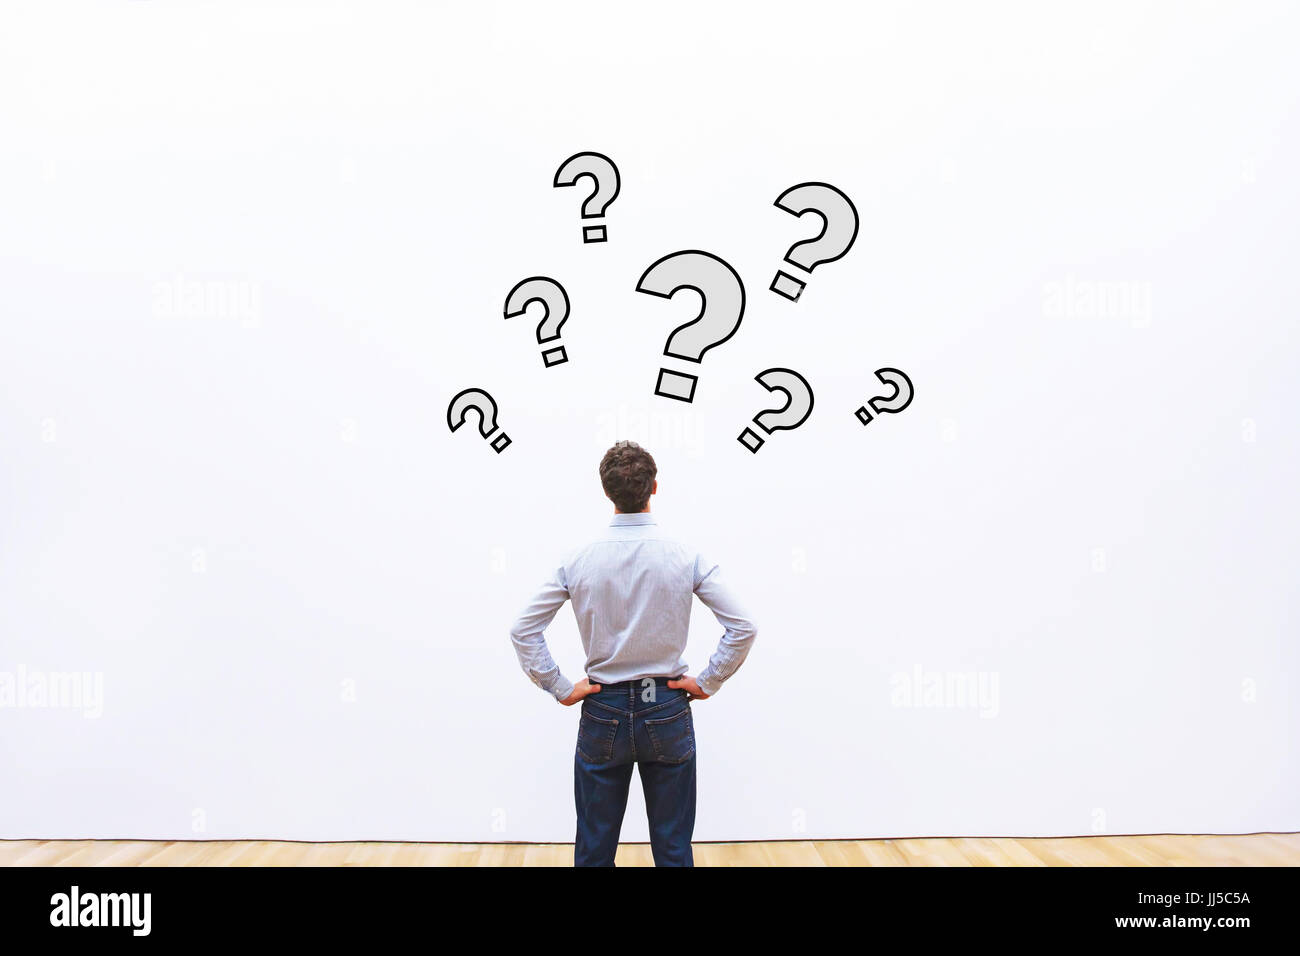 questions, business concept Stock Photo